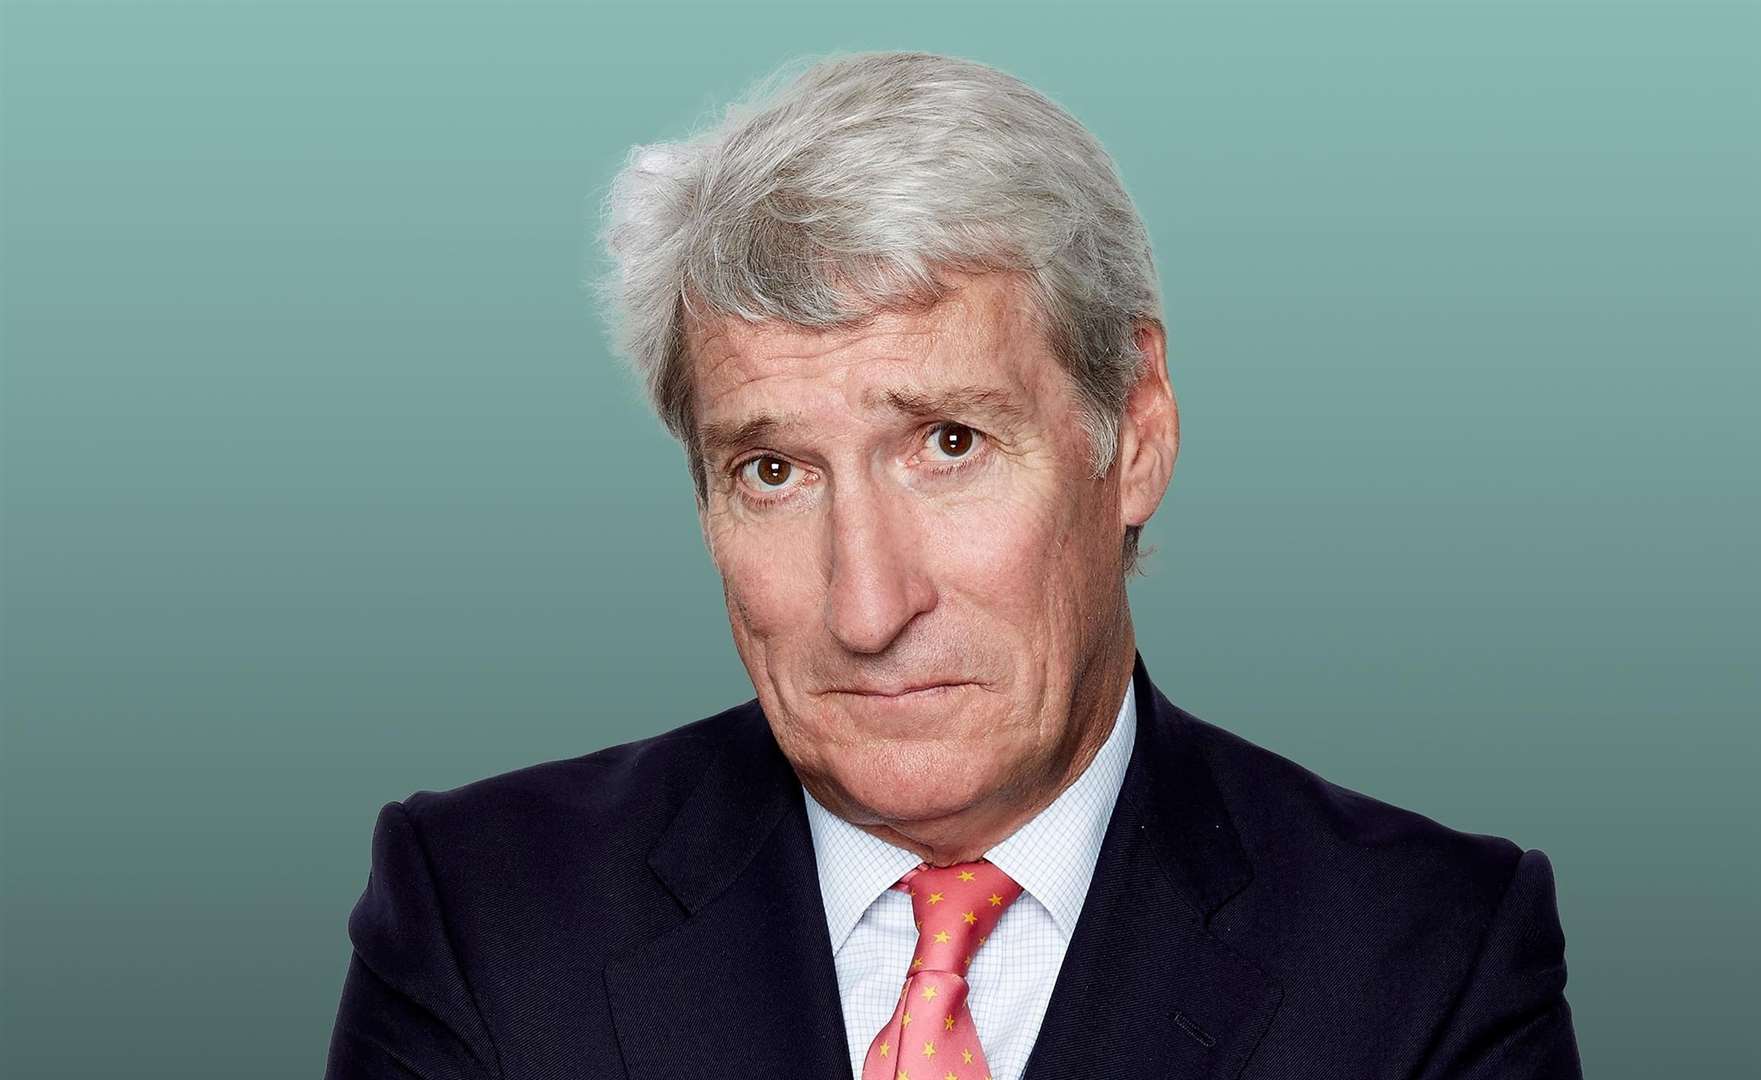 Jeremy Paxman is set to join